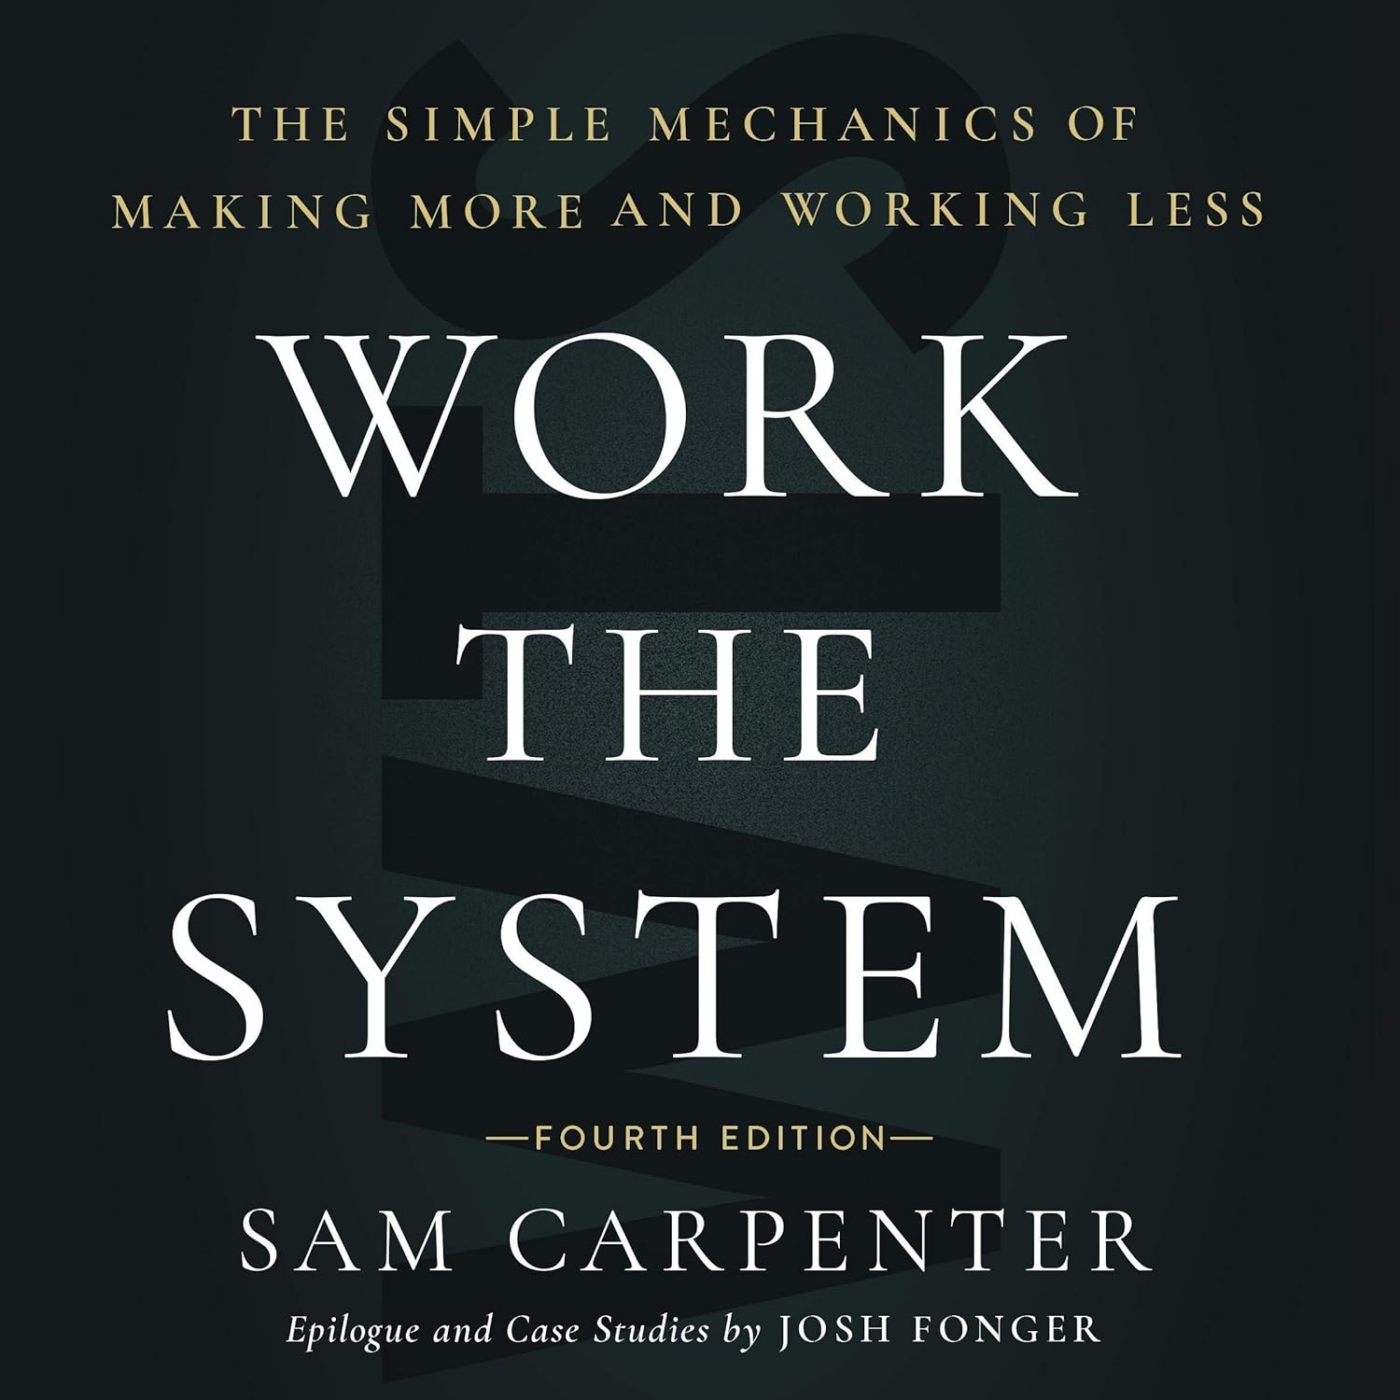 Work the System by Sam Carpenter